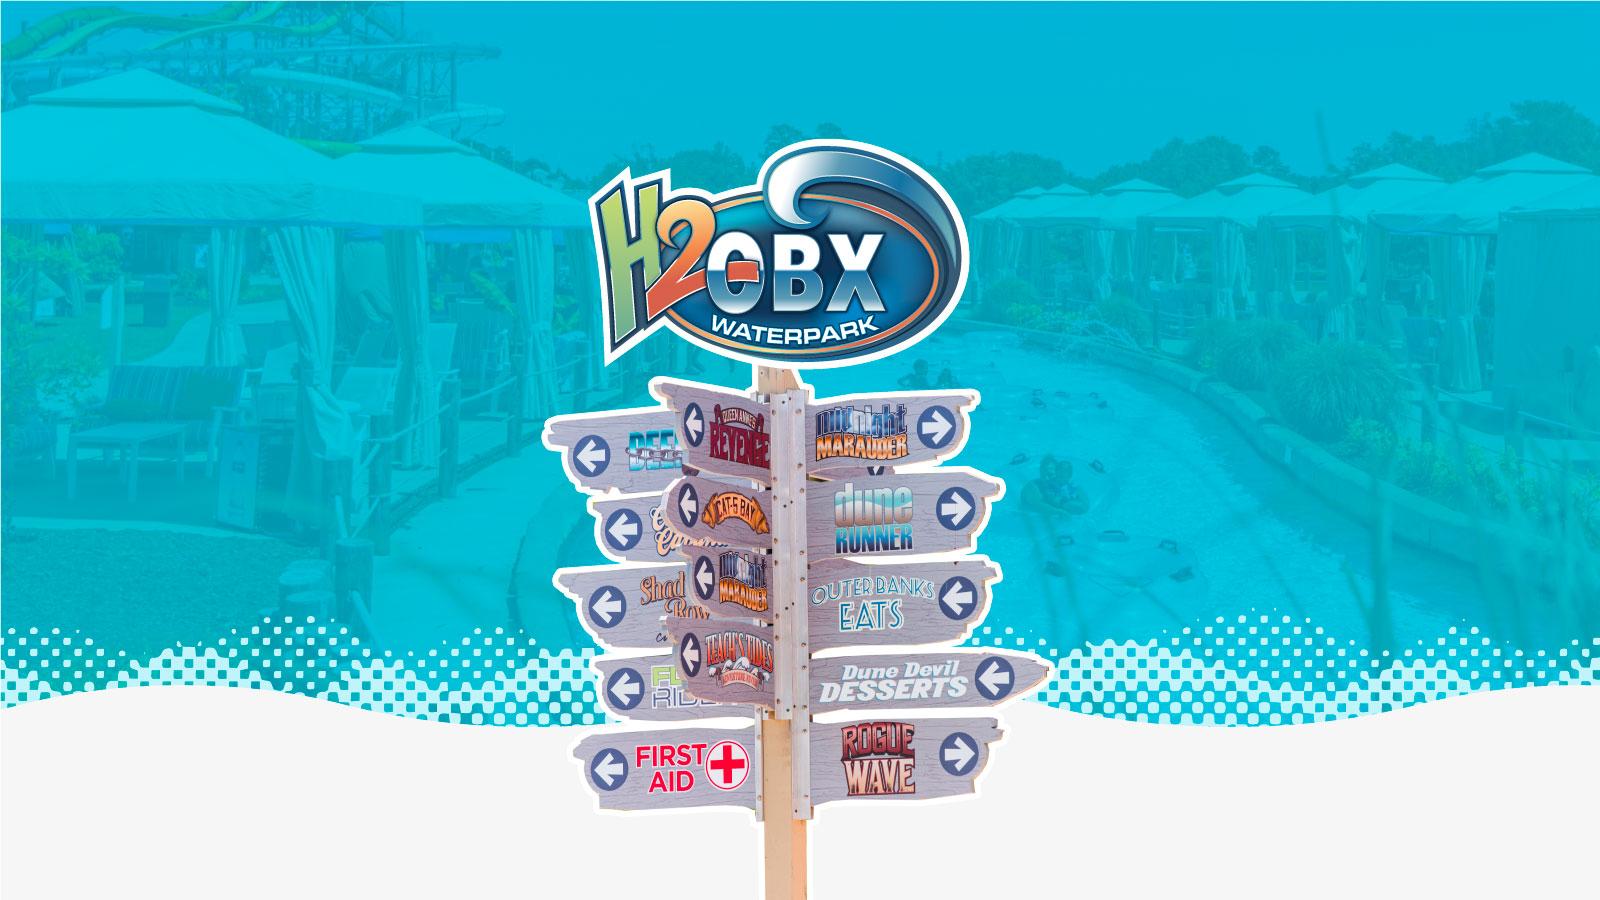 H2OBX Waterpark | Waterpark wayfinding sign